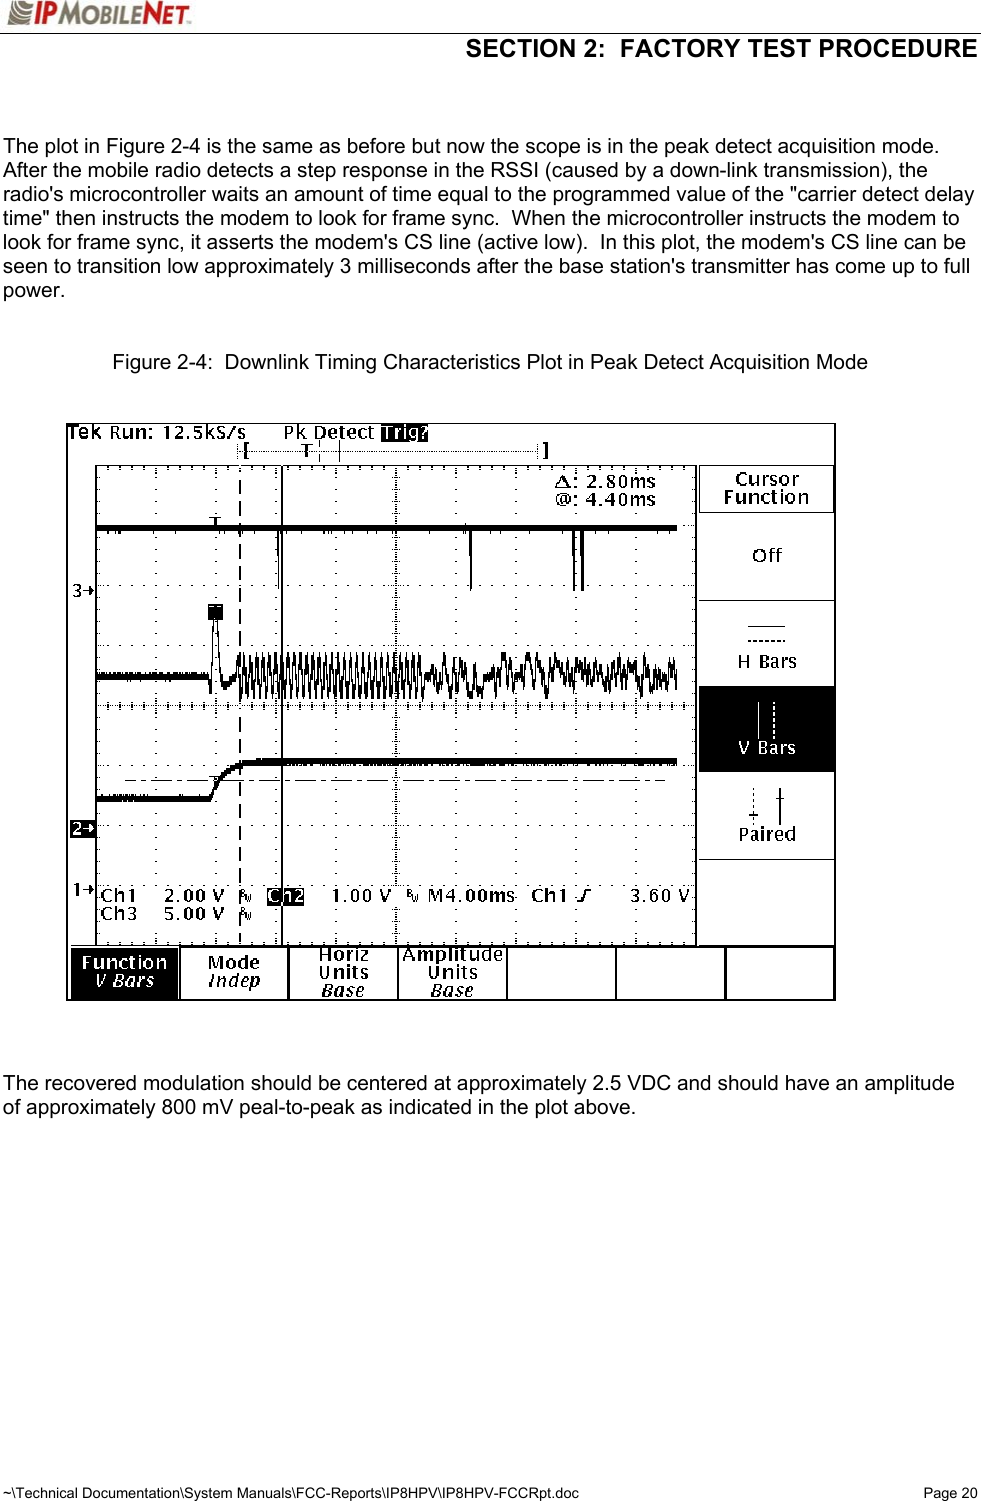   SECTION 2:  FACTORY TEST PROCEDURE  ~\Technical Documentation\System Manuals\FCC-Reports\IP8HPV\IP8HPV-FCCRpt.doc  Page 20   The plot in Figure 2-4 is the same as before but now the scope is in the peak detect acquisition mode.  After the mobile radio detects a step response in the RSSI (caused by a down-link transmission), the radio&apos;s microcontroller waits an amount of time equal to the programmed value of the &quot;carrier detect delay time&quot; then instructs the modem to look for frame sync.  When the microcontroller instructs the modem to look for frame sync, it asserts the modem&apos;s CS line (active low).  In this plot, the modem&apos;s CS line can be seen to transition low approximately 3 milliseconds after the base station&apos;s transmitter has come up to full power.    Figure 2-4:  Downlink Timing Characteristics Plot in Peak Detect Acquisition Mode      The recovered modulation should be centered at approximately 2.5 VDC and should have an amplitude of approximately 800 mV peal-to-peak as indicated in the plot above.